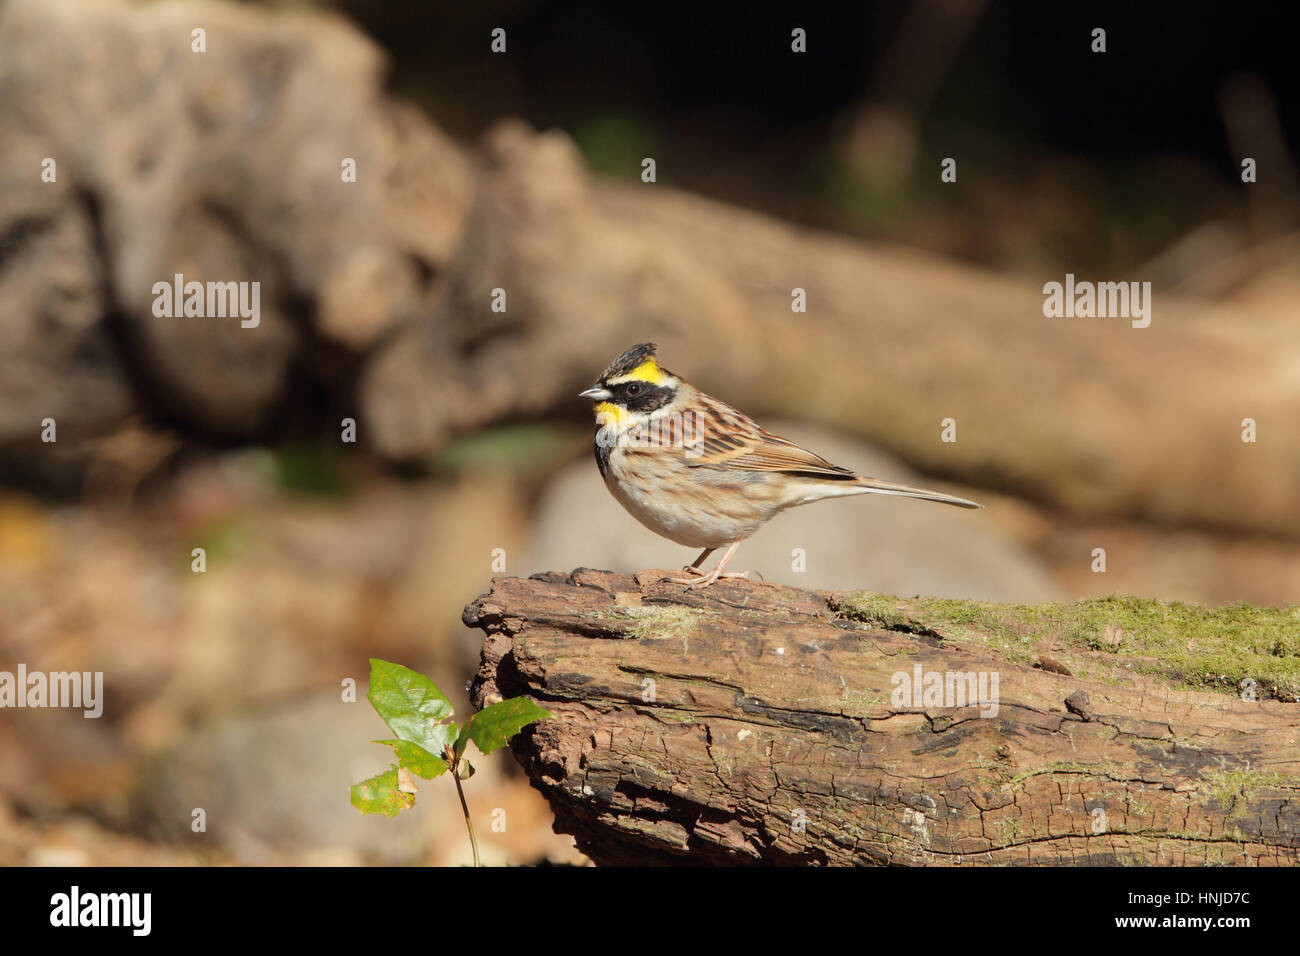 Yellow-throated Bunting (Emberiza elegant), an Asian seed-eating bird, perched on log in woodland, on Kyushu, Japan Stock Photo